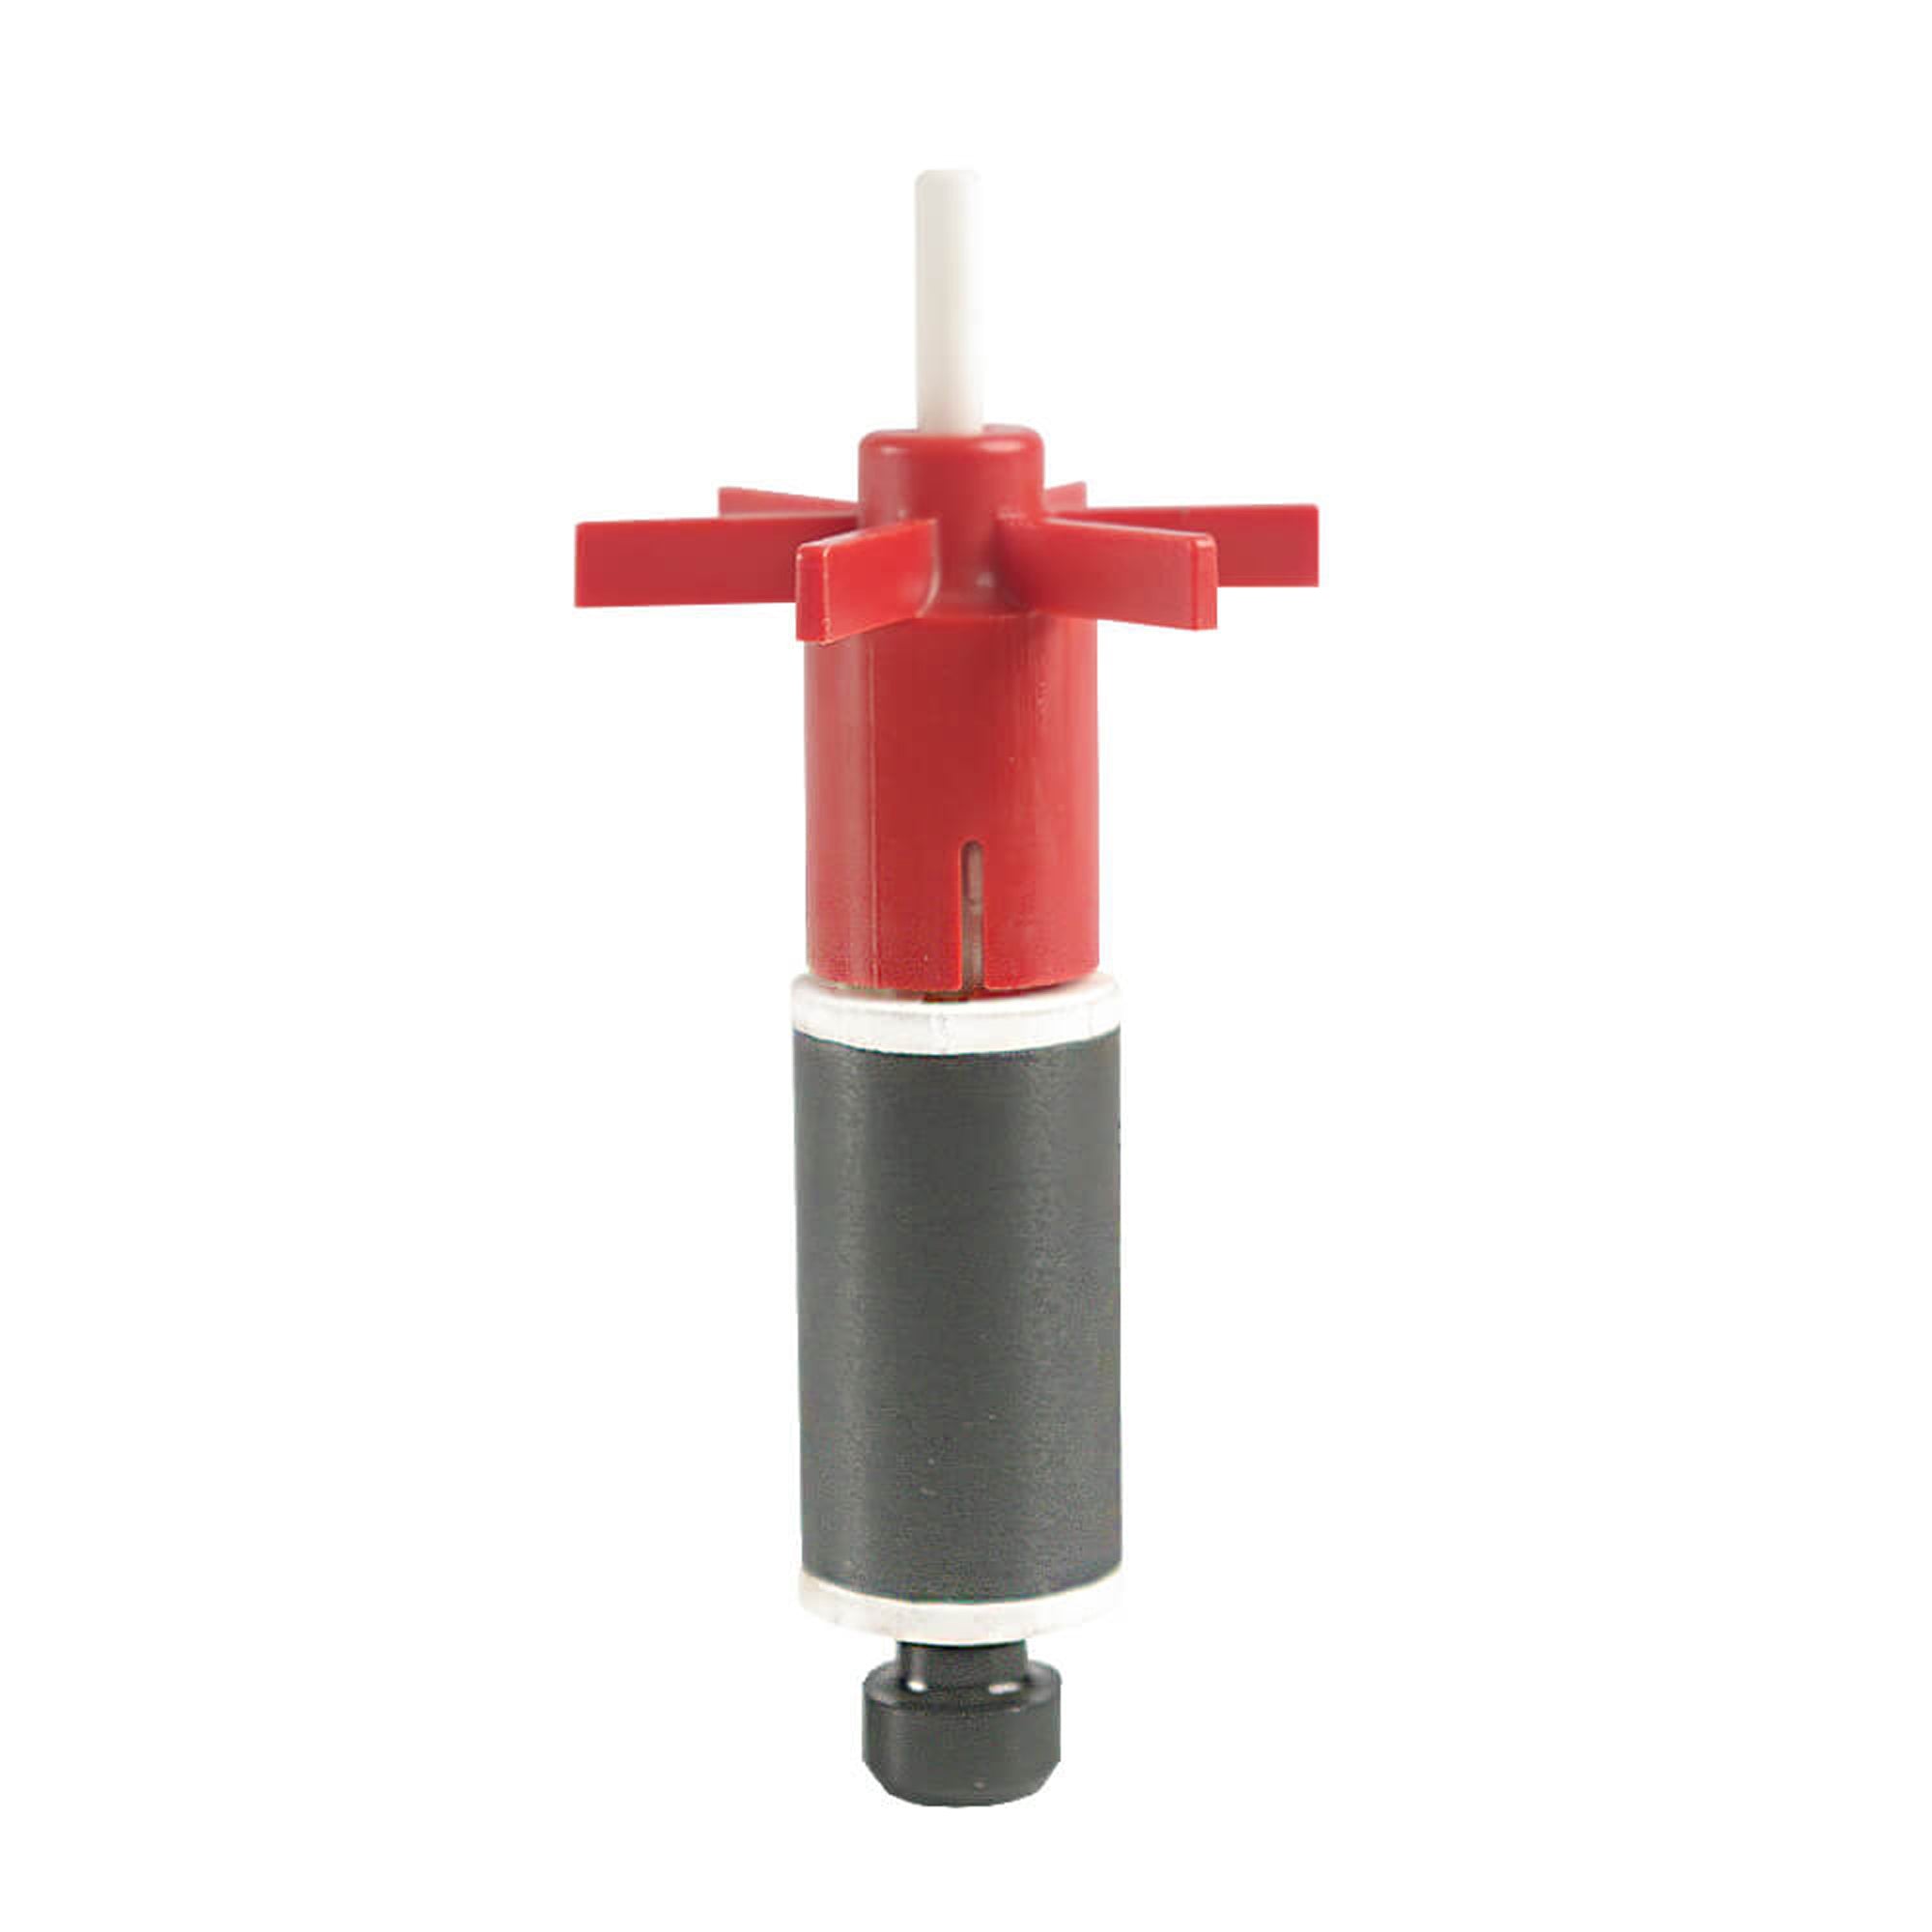 Fluval Replacement Magnetic Impeller with Ceramic Shaft & Rubber Bushing for 107/207 Filters